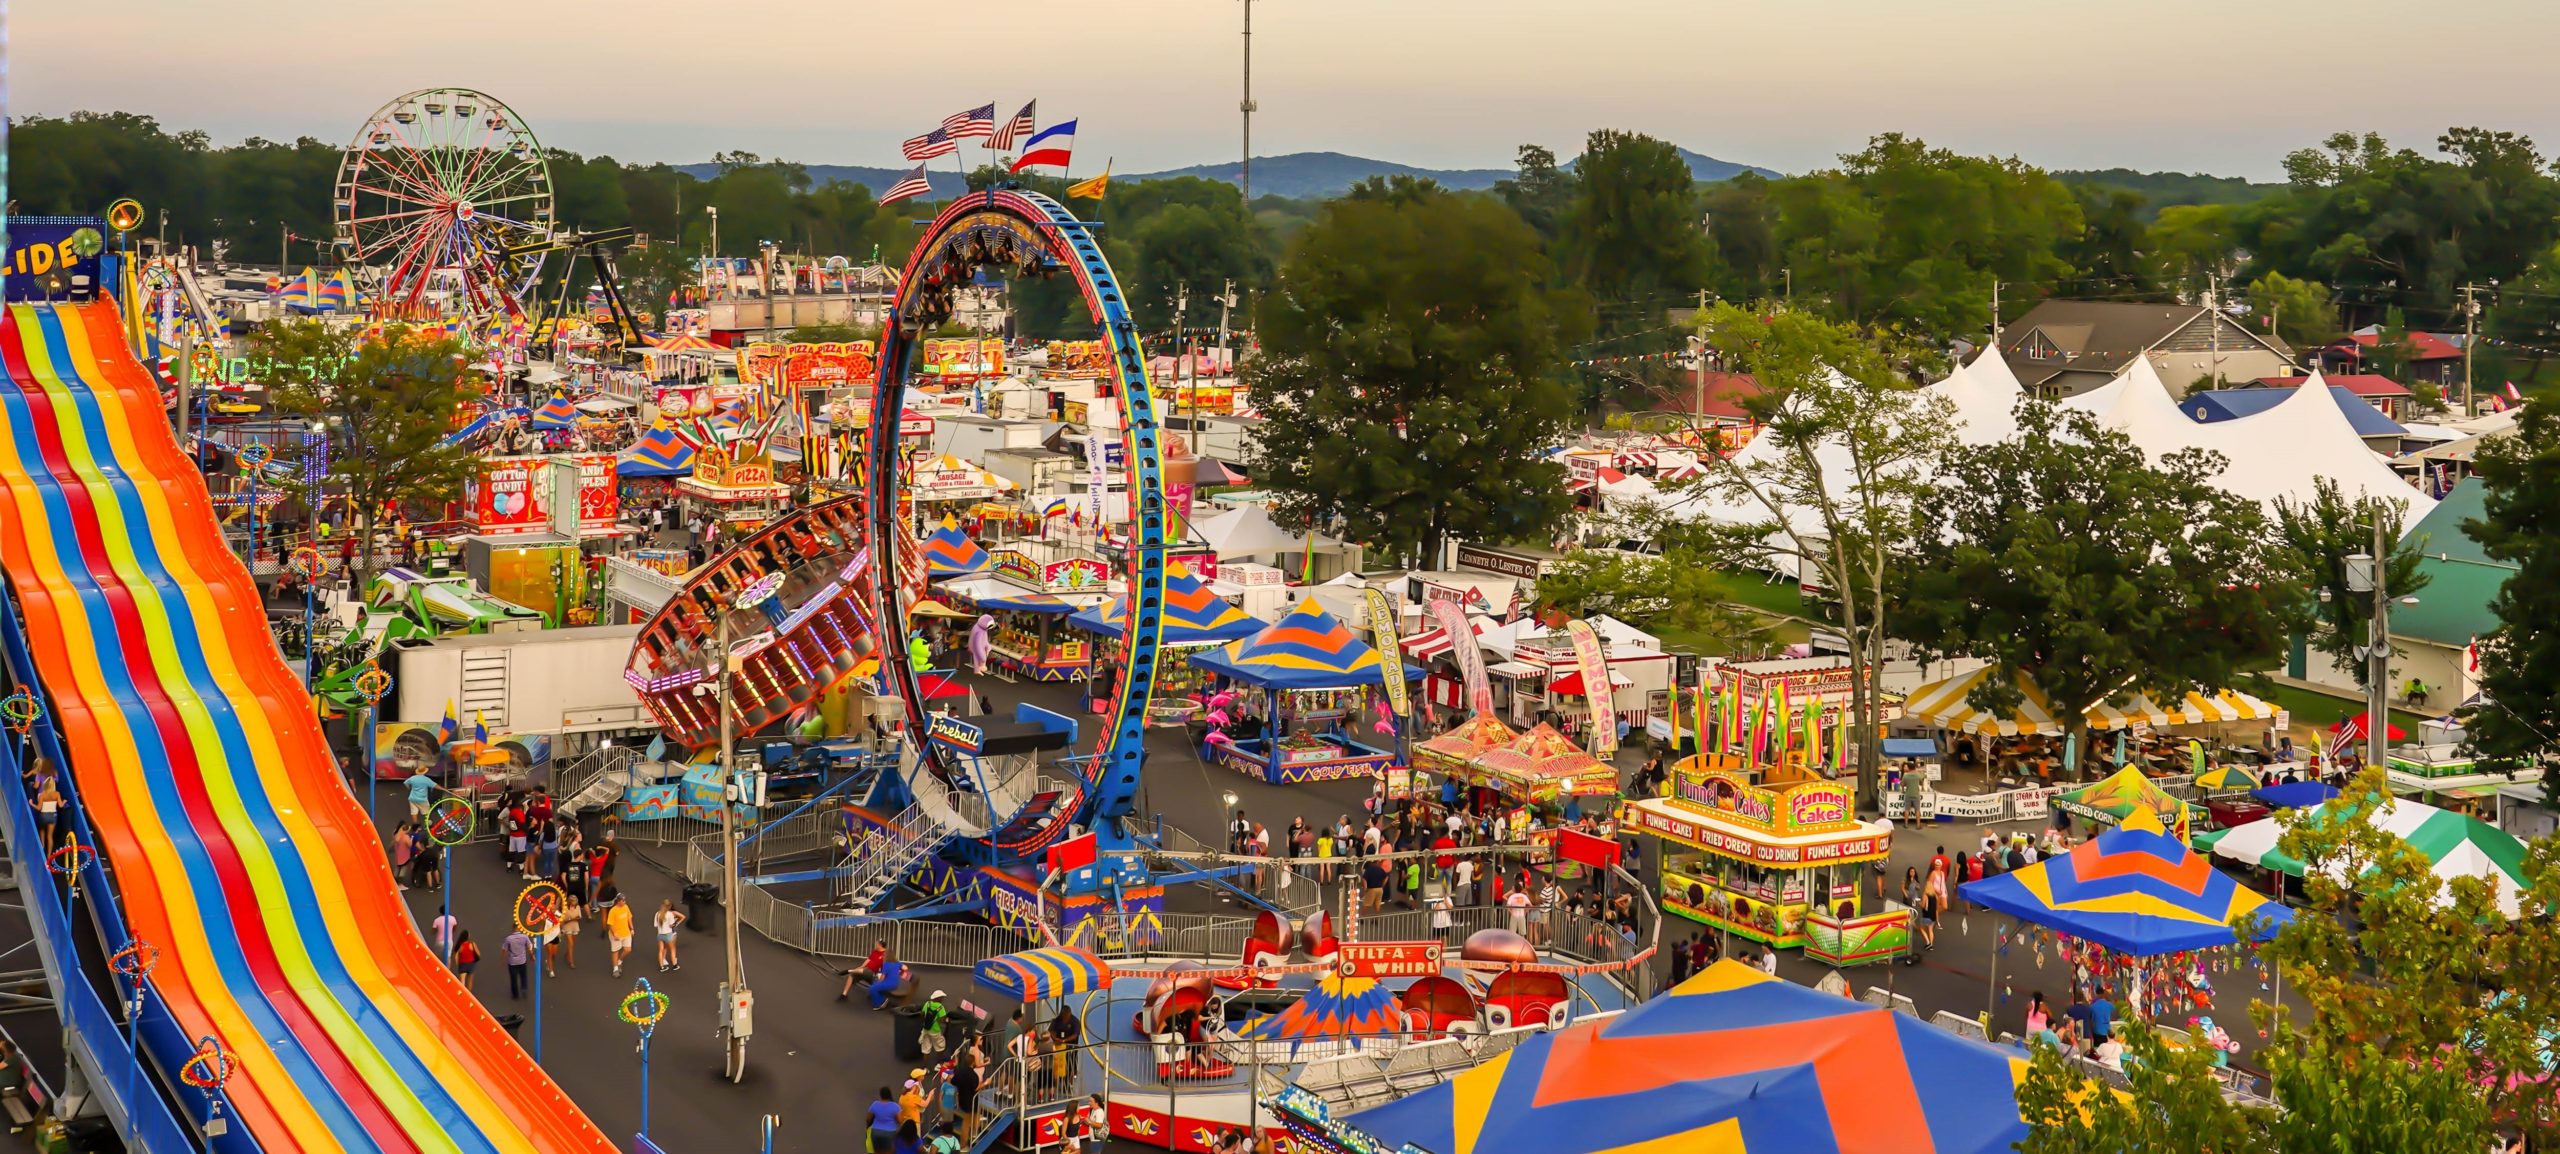 Wilson Co. Fair – Tennessee State Fair to celebrate all 95 counties | UCBJ - Upper Cumberland